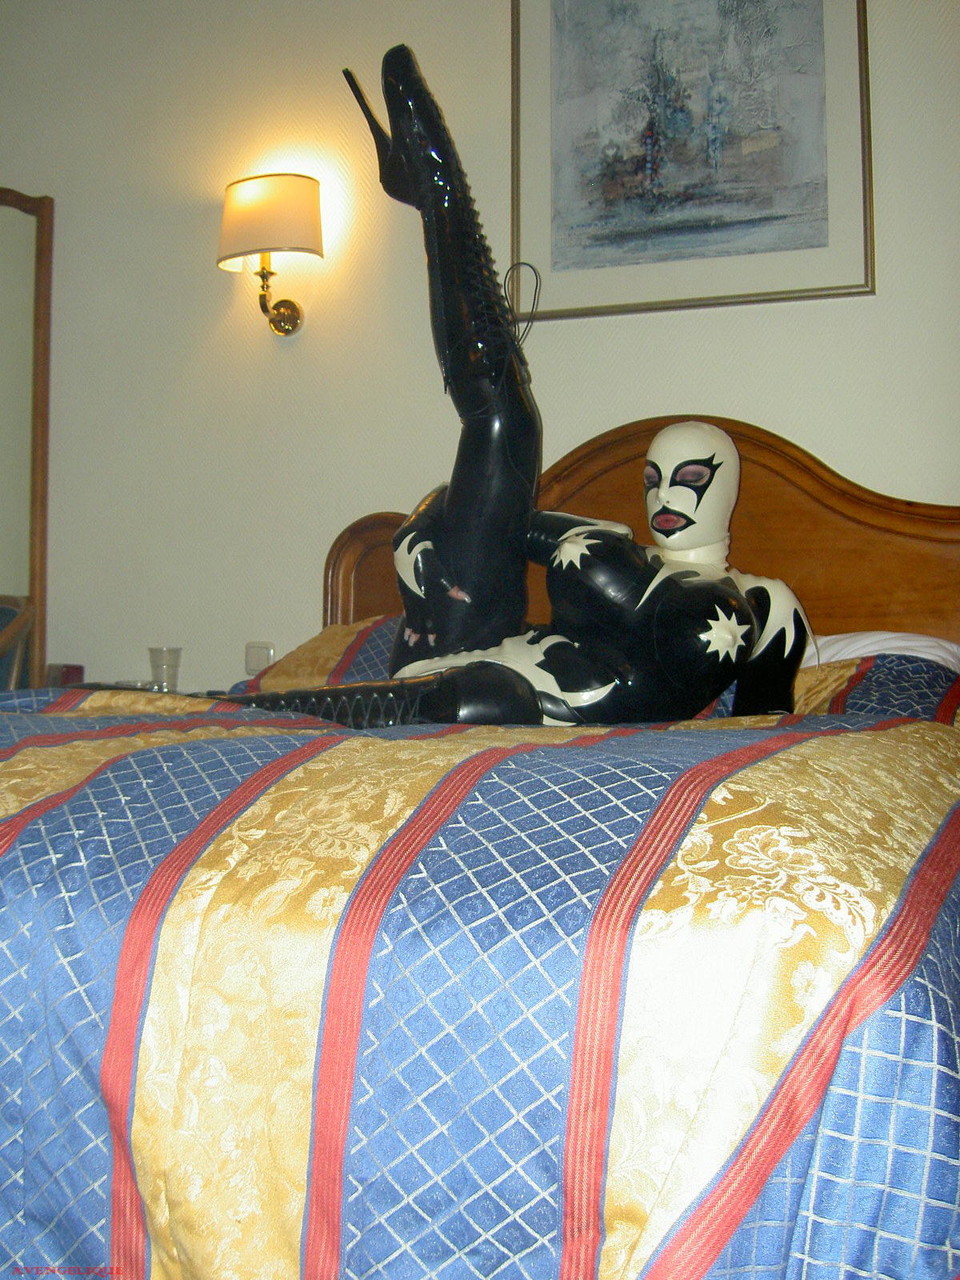 Fetish model Darkwing Zero poses on a hotel room bed in latex clothing porn photo #426050024 | Rubber Tits Pics, Darkwing Zero, Latex, mobile porn